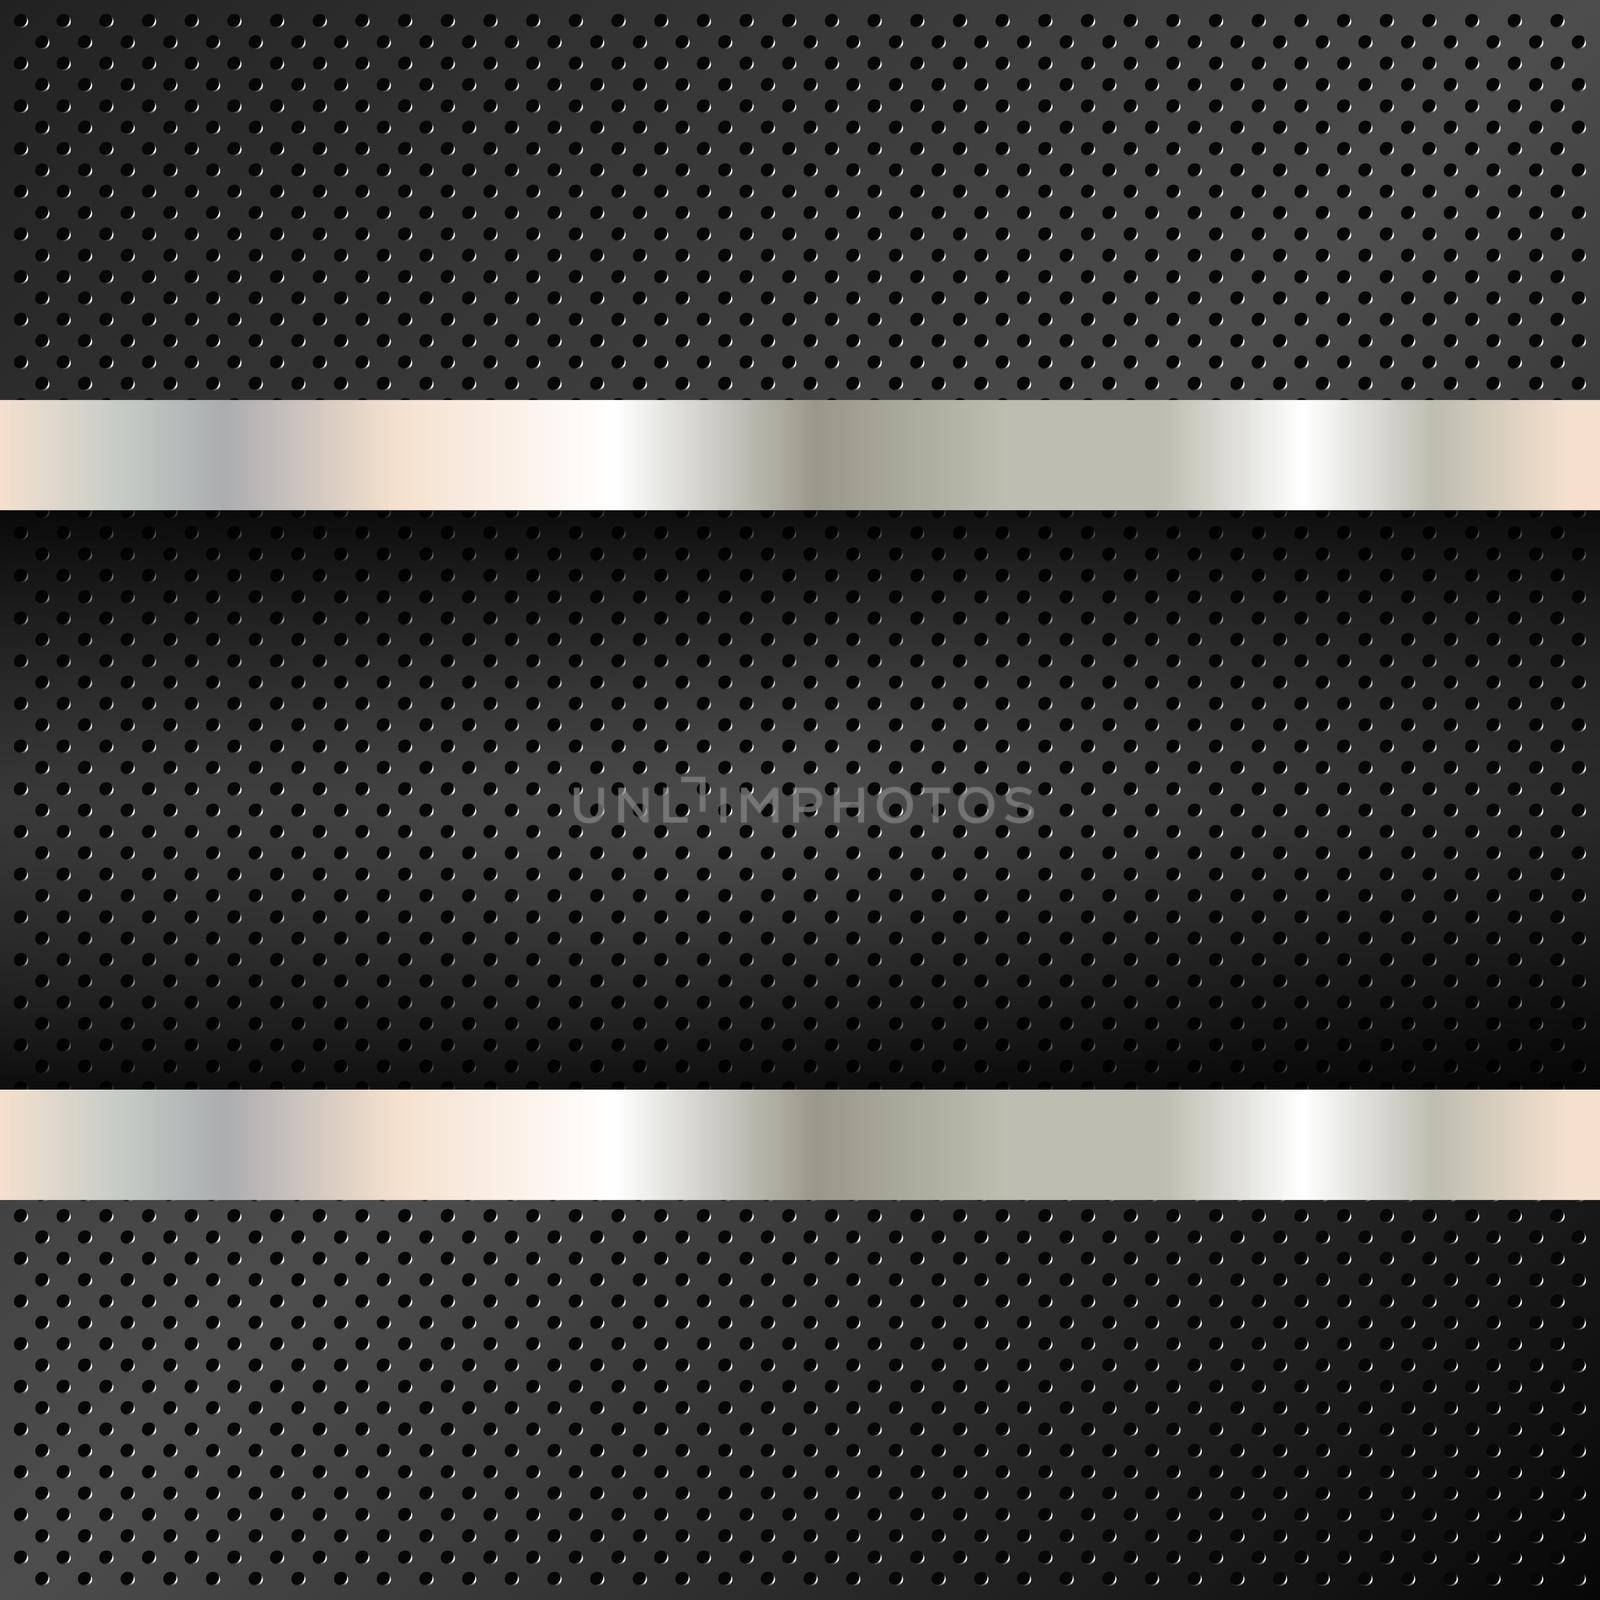 Technology background with perforated circles. Cell metal backdrop with banner. Vector illustration